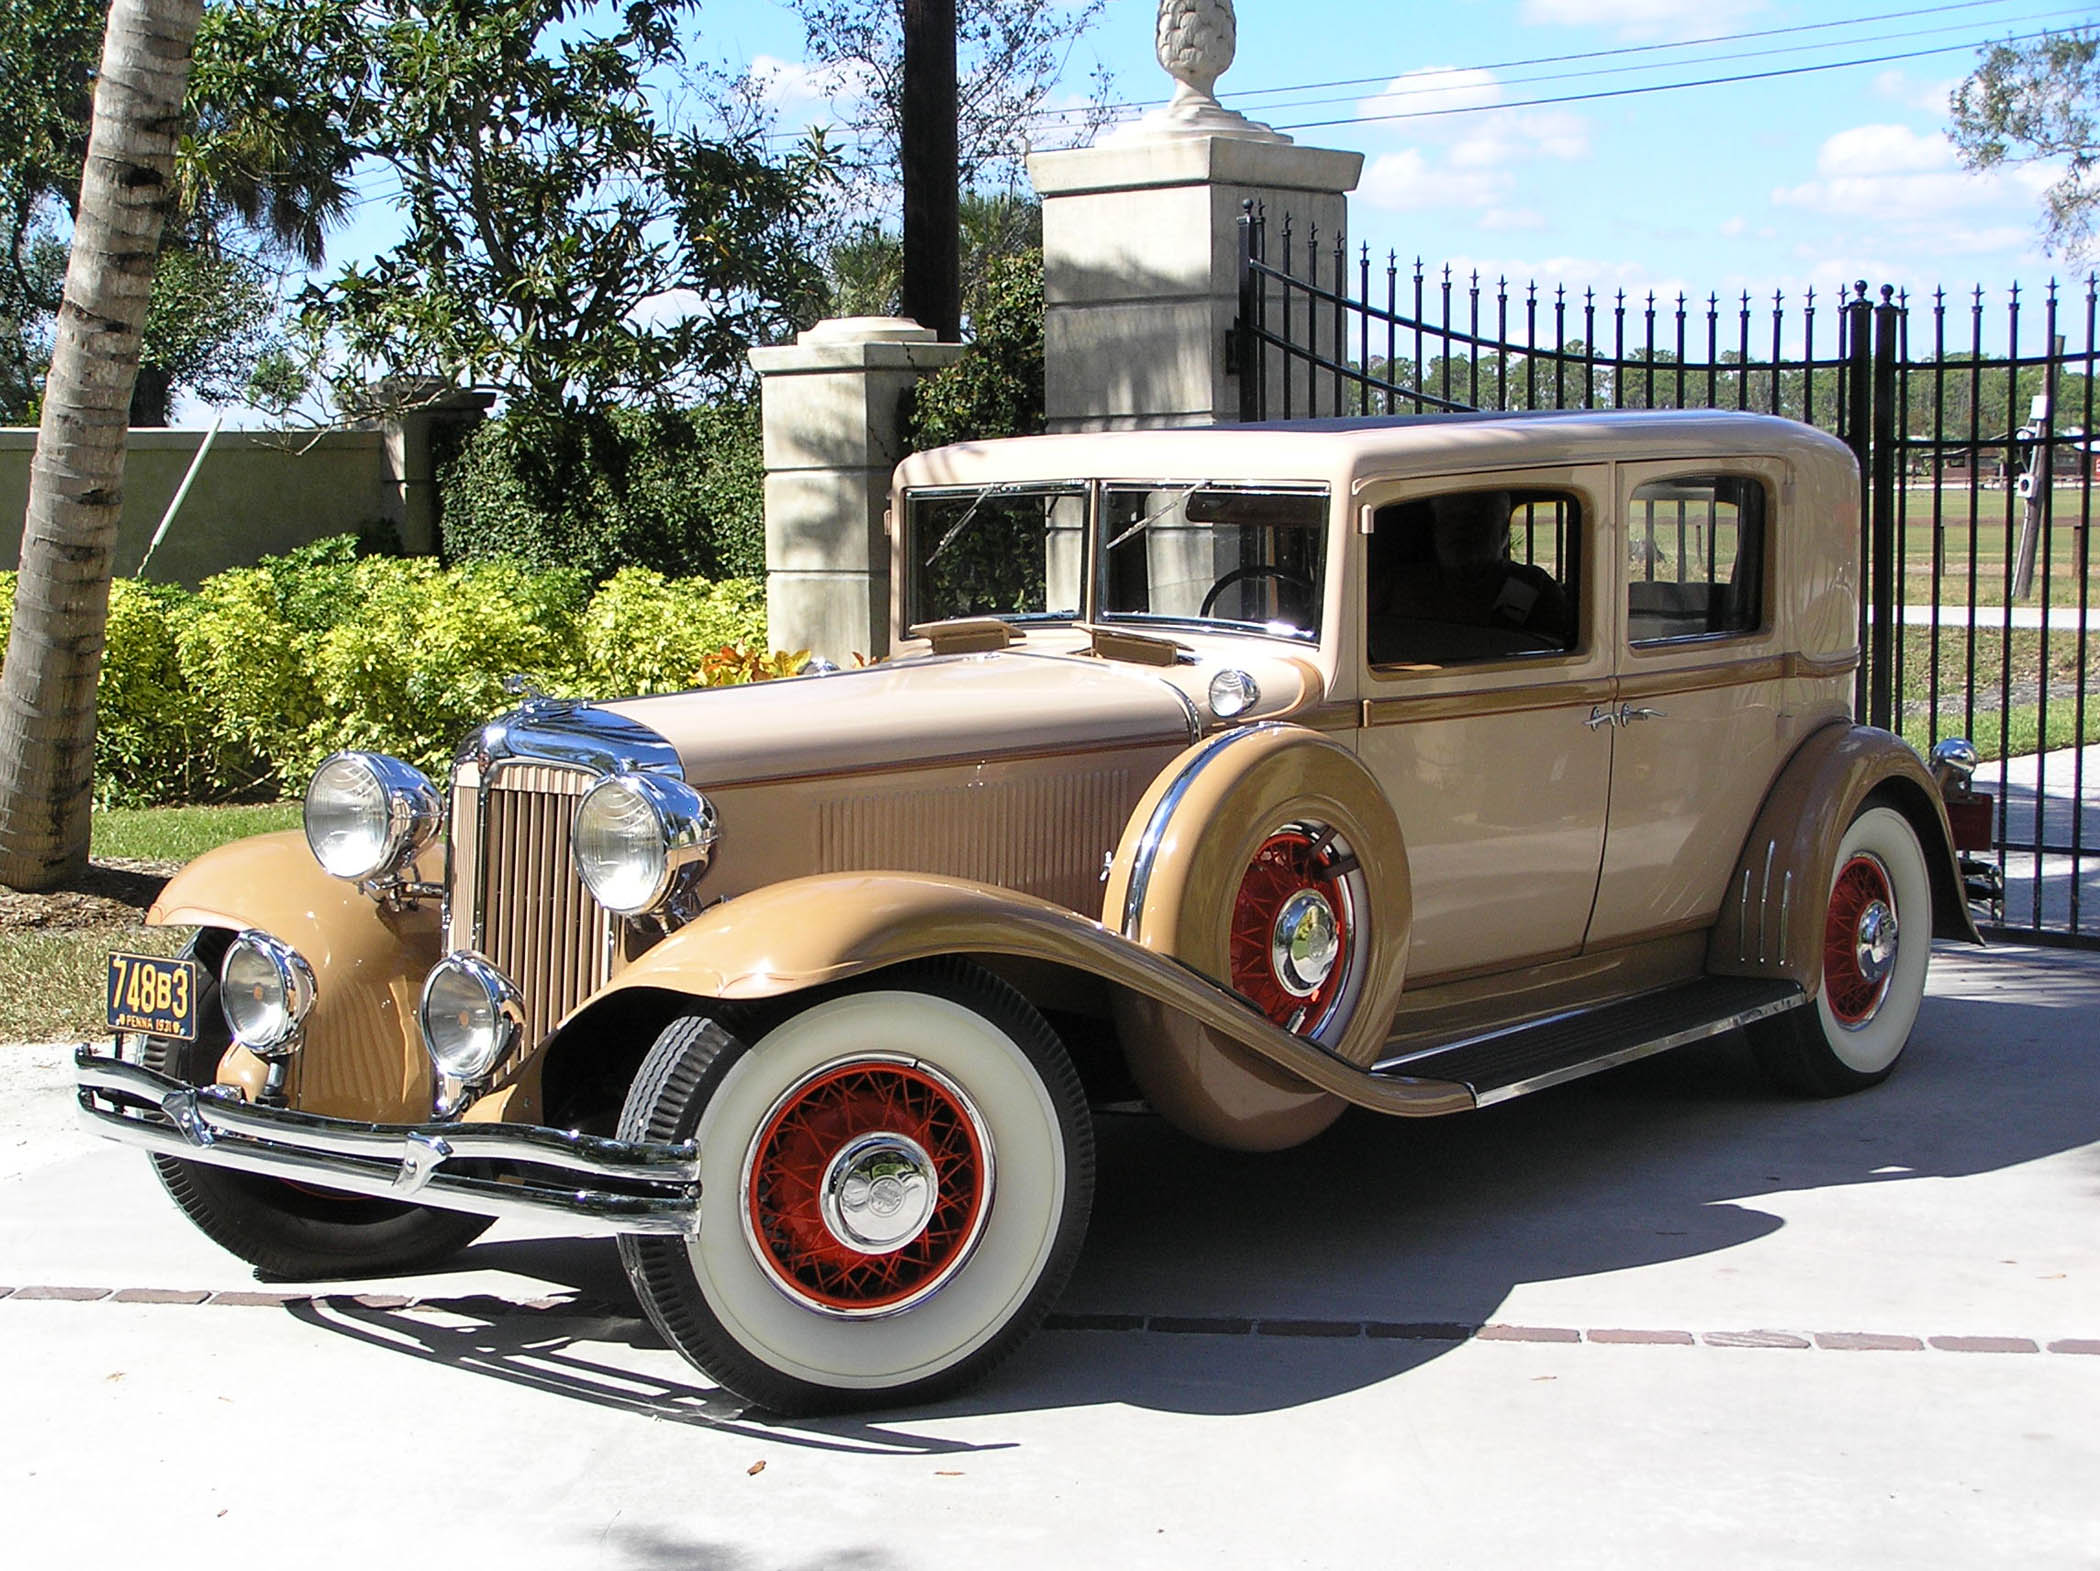 Amazing 1931 Chrysler Imperial Pictures & Backgrounds